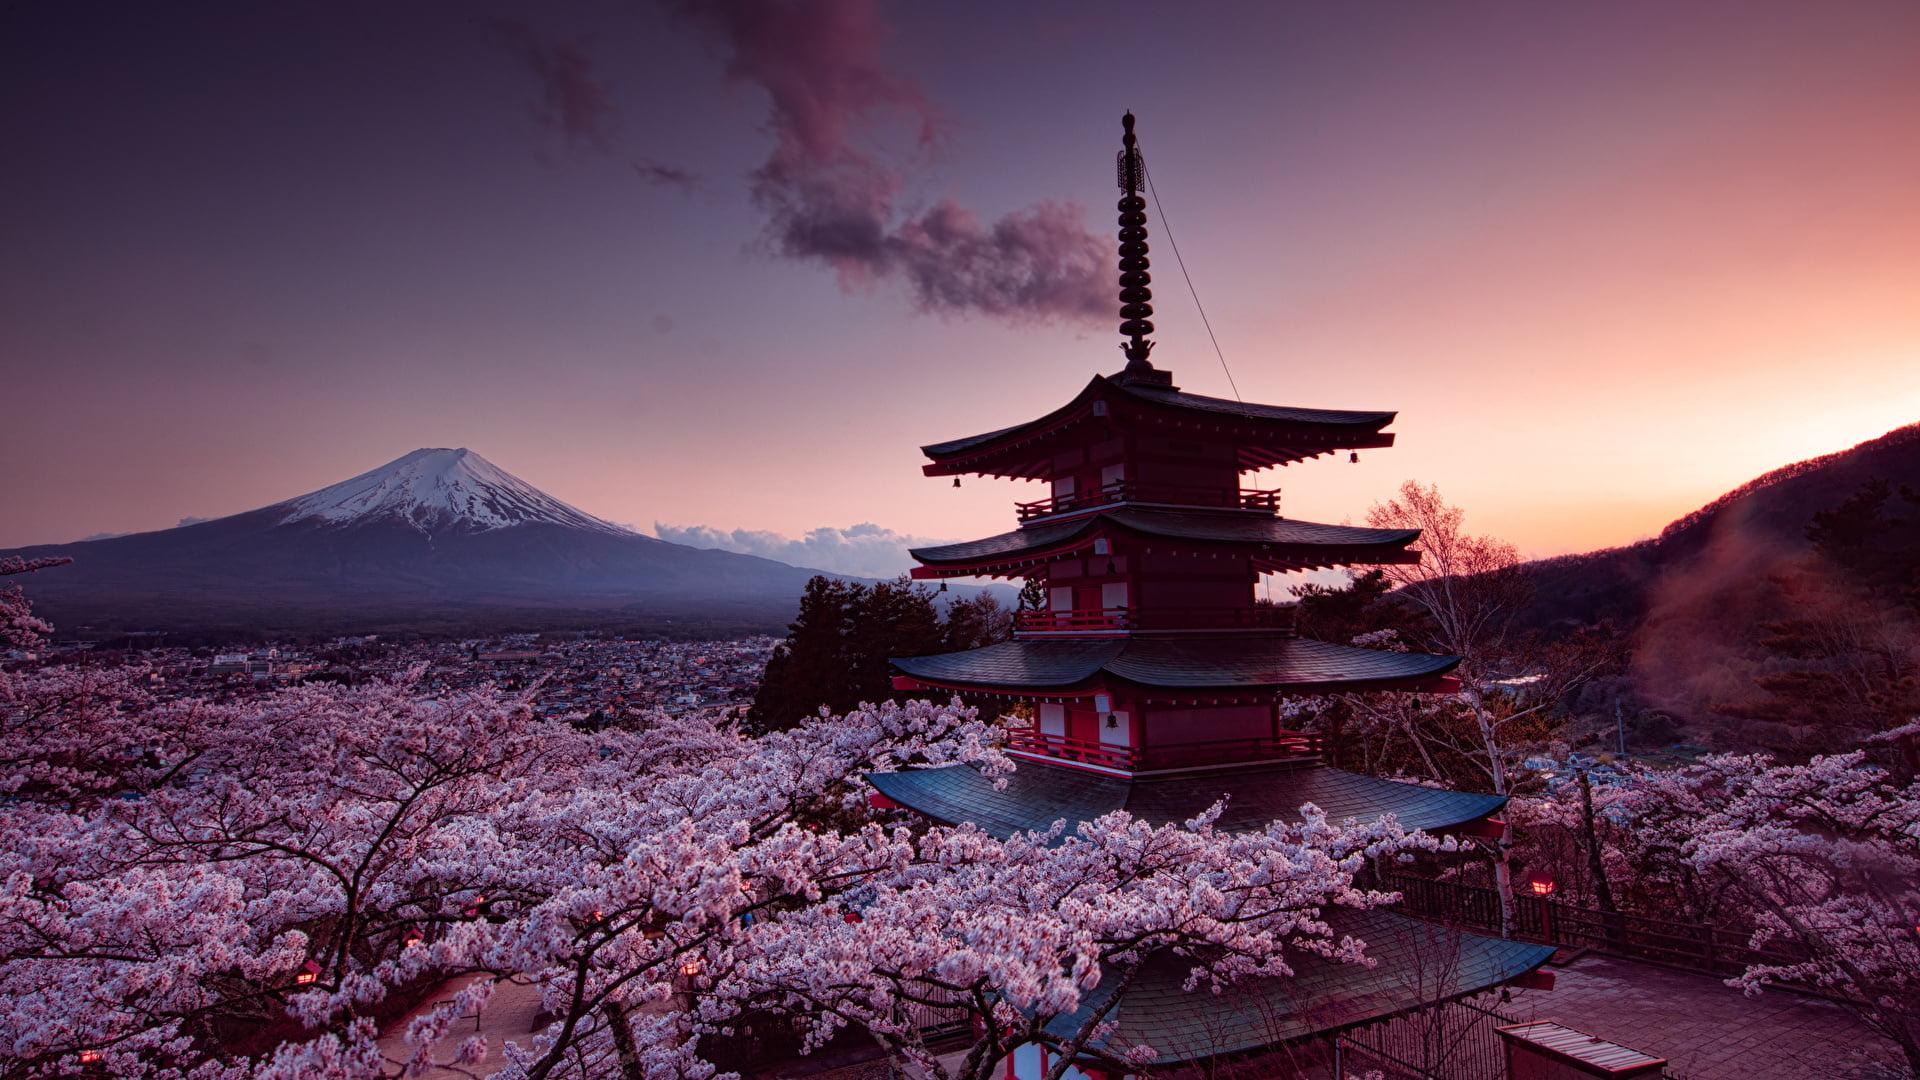 Mount Fuji, Japan, brown and white pagoda, cherry blossom, pink